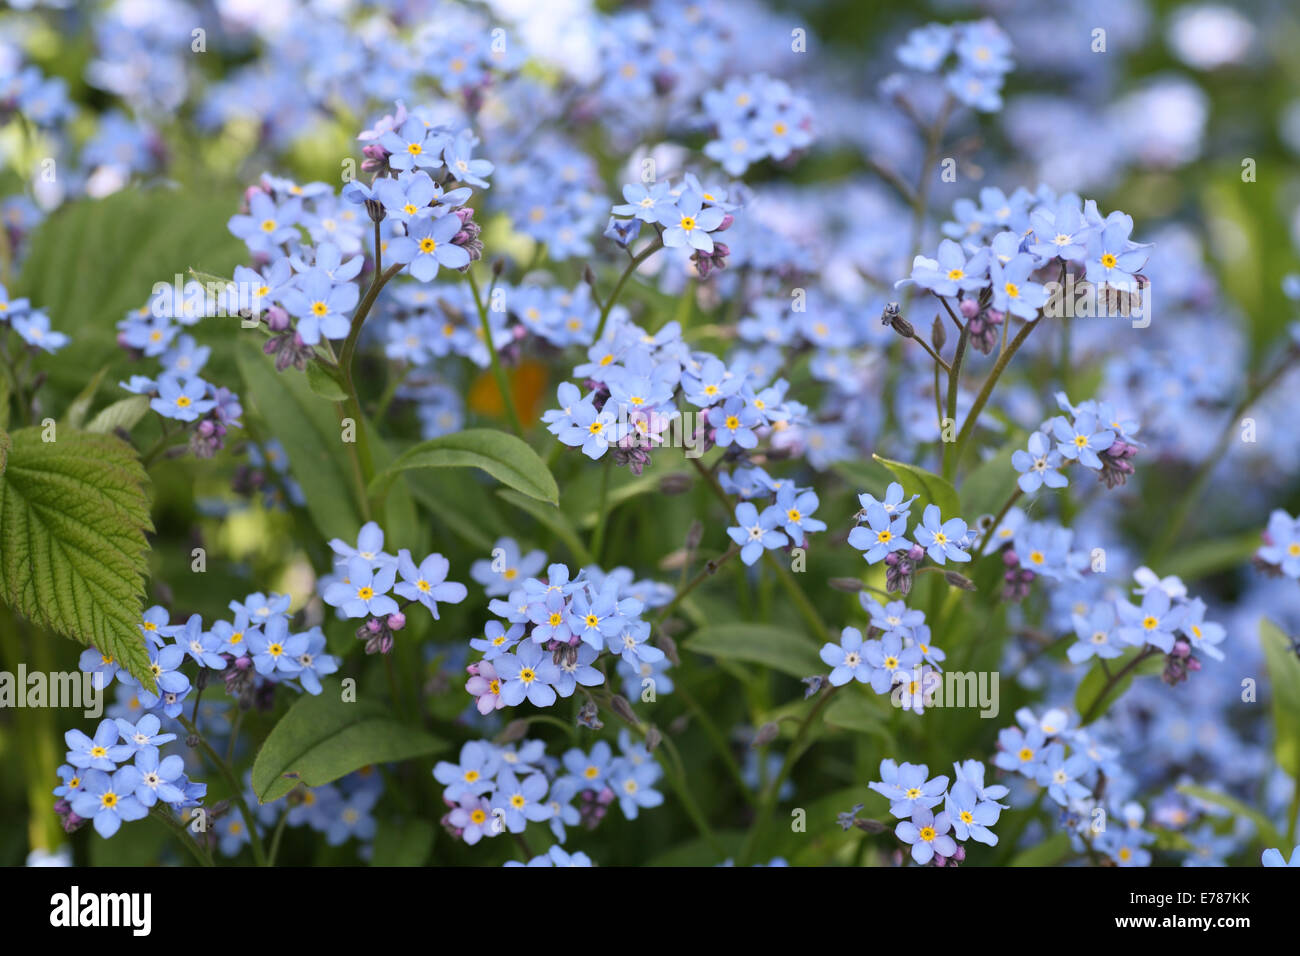 Forget-me-not. Stock Photo